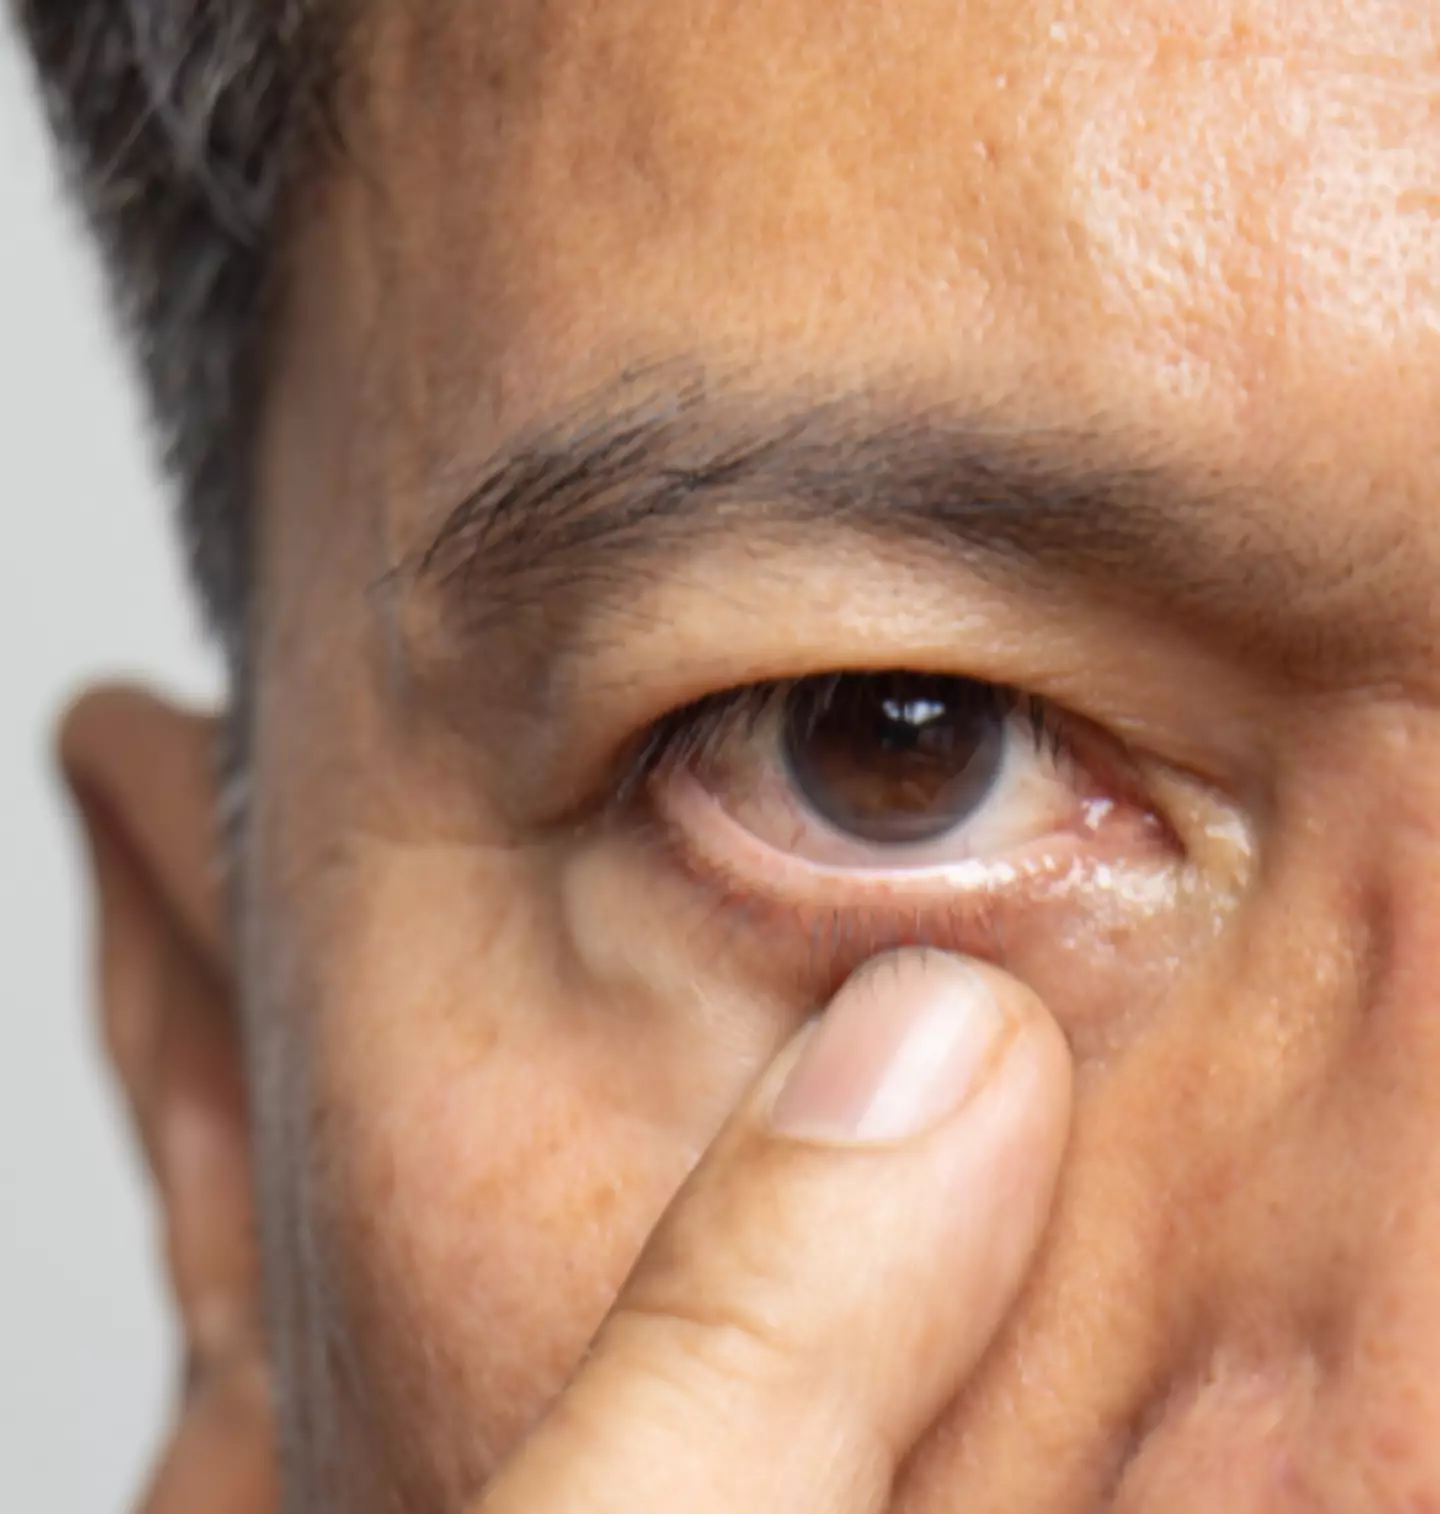 If your eye twitch is severe, it could be early onset Parkinson's Disease.